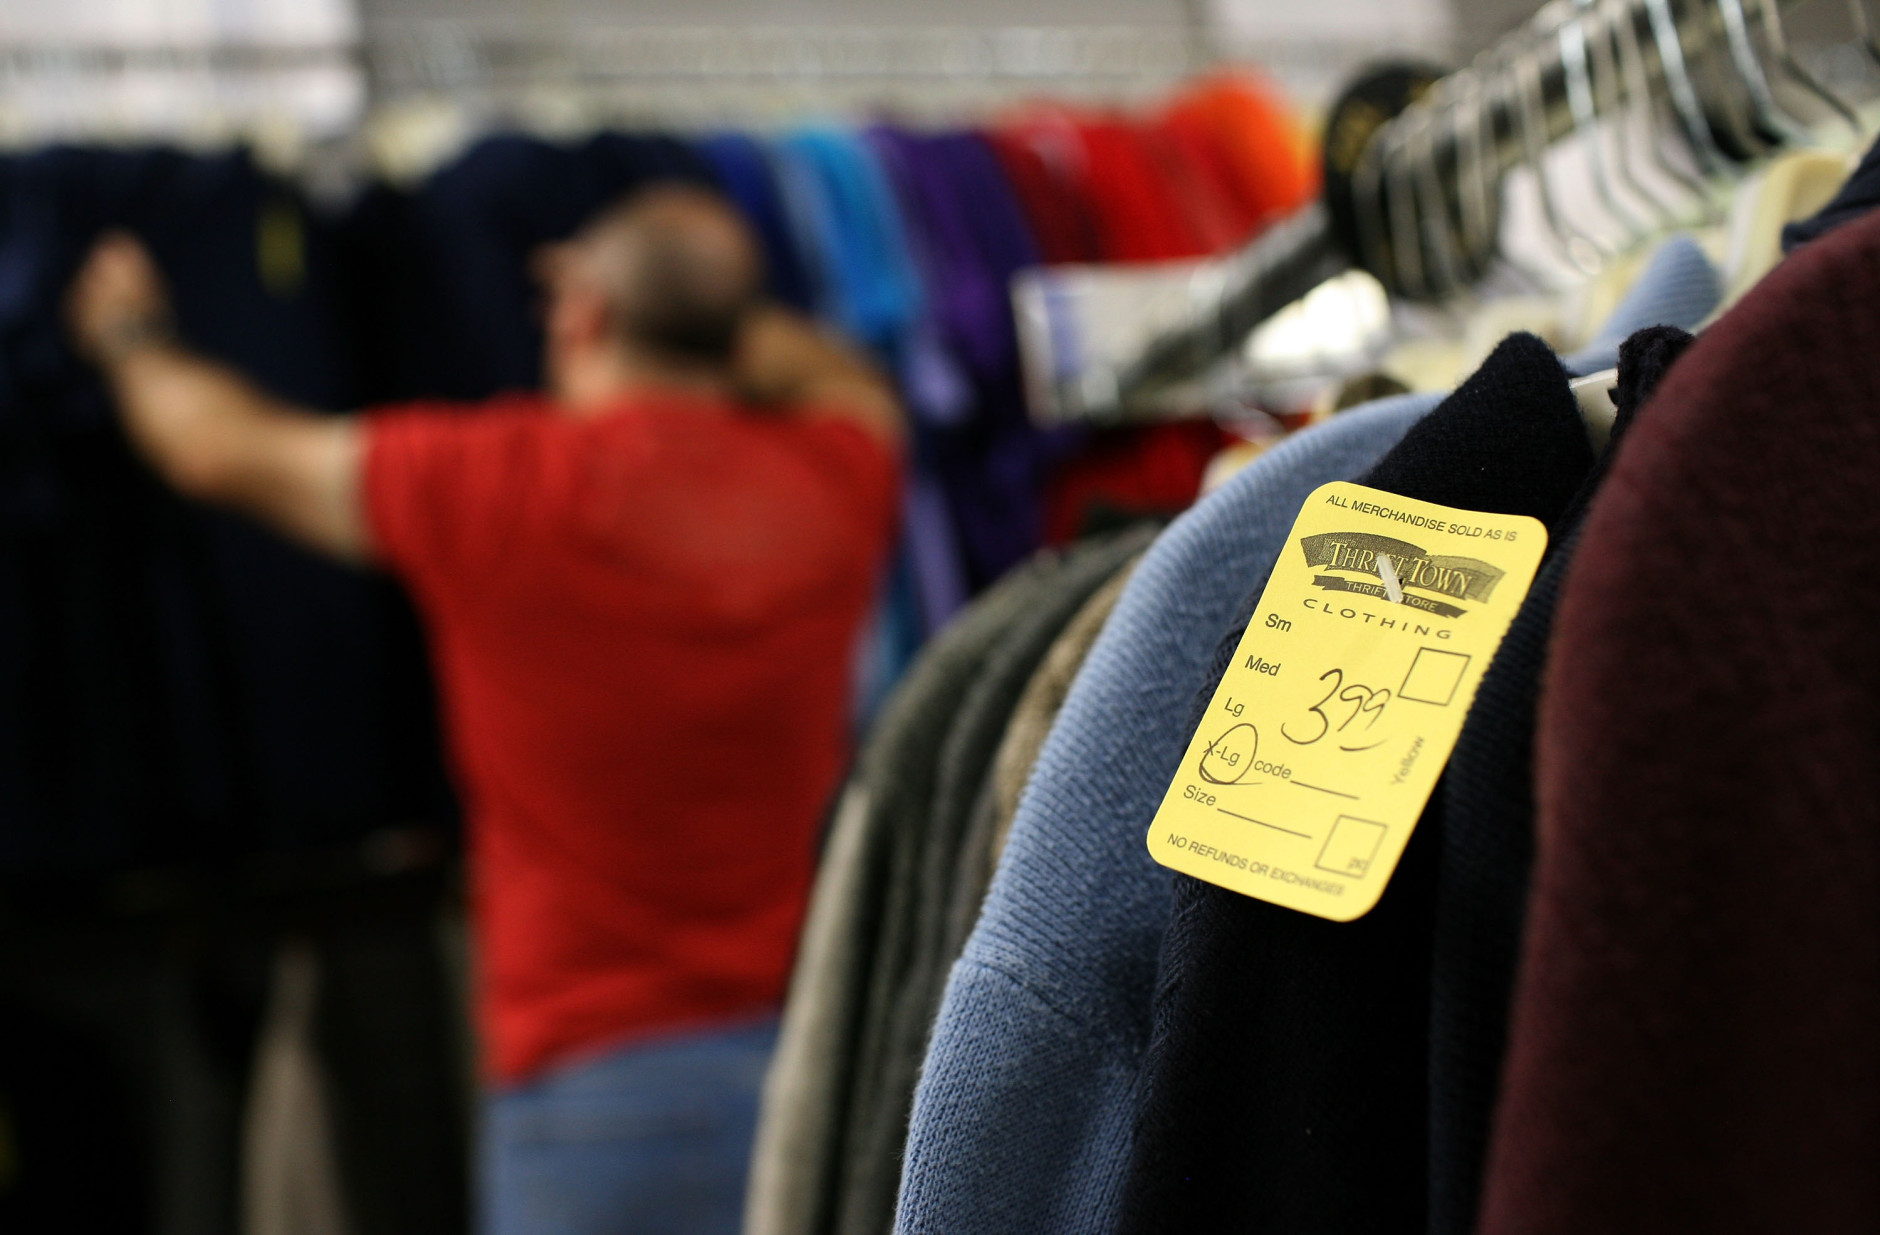 SAN FRANCISCO - OCTOBER 14:  A price tag is seen on a sweater at a Thrift Town thrift store October 14, 2008 in San Francisco, California. As the economy continues to falter, thrift stores are seeing a surge in business as Ameicans look for ways to save money.  (Photo by Justin Sullivan/Getty Images)